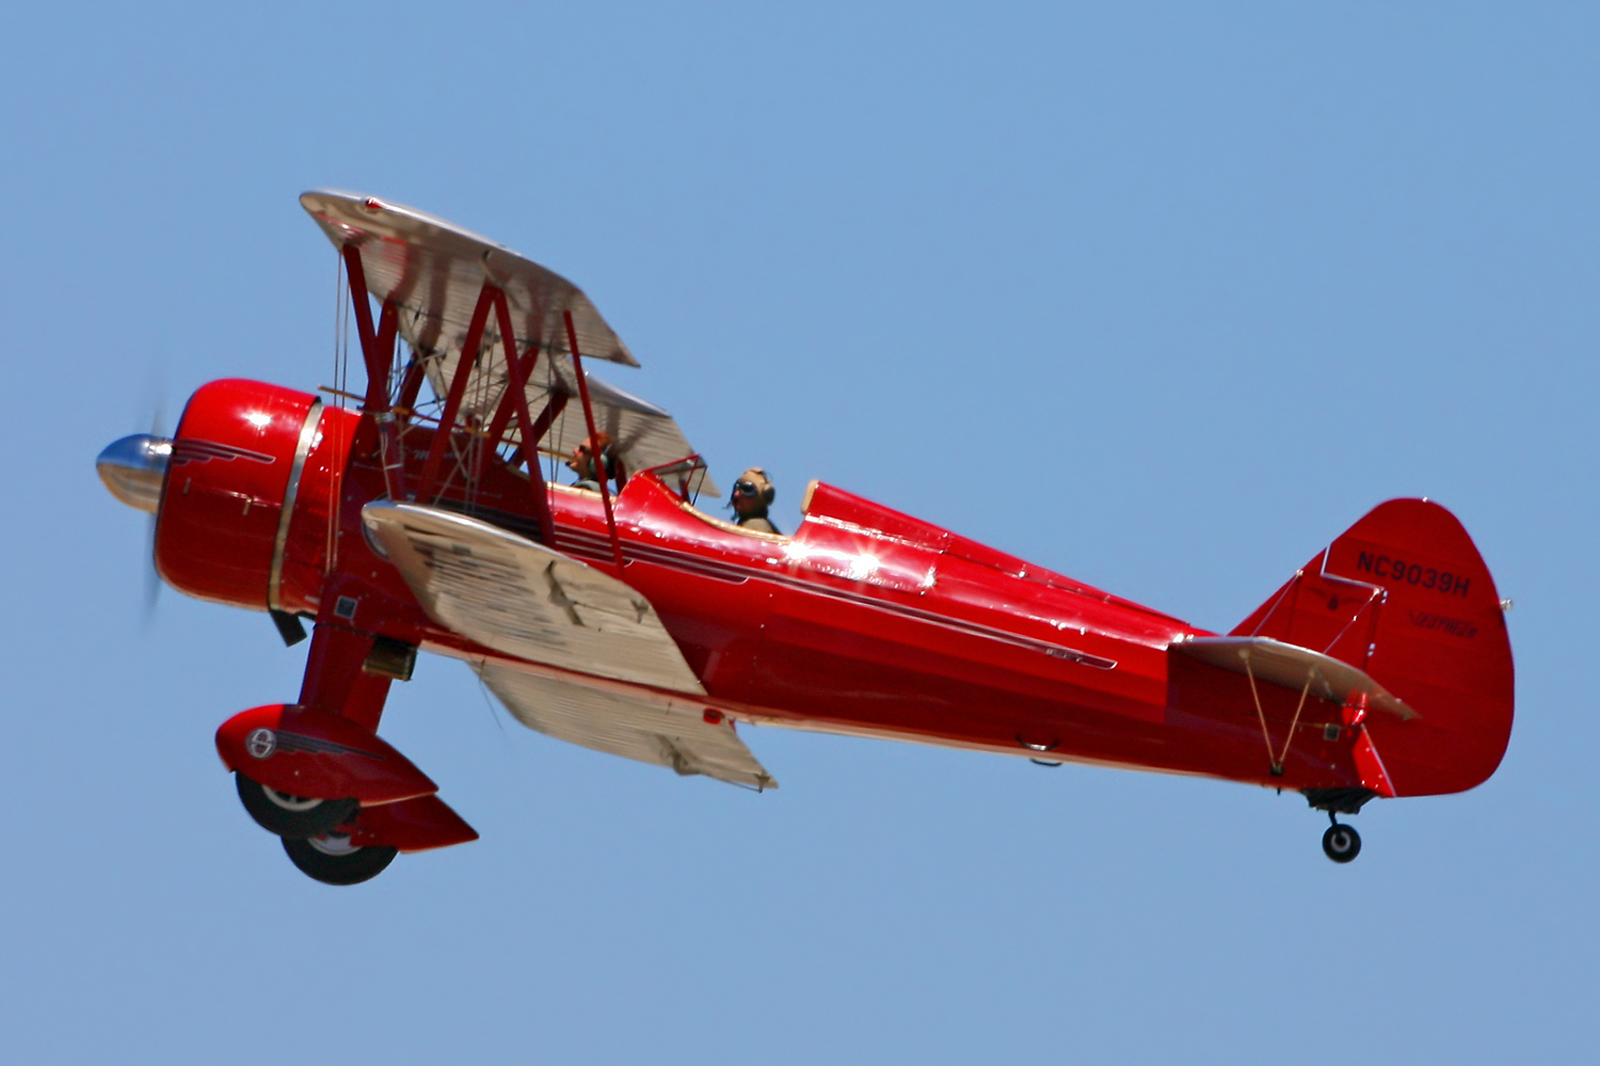 The 13th Annual Wings Over Gillespie Air Show | Airport Journals